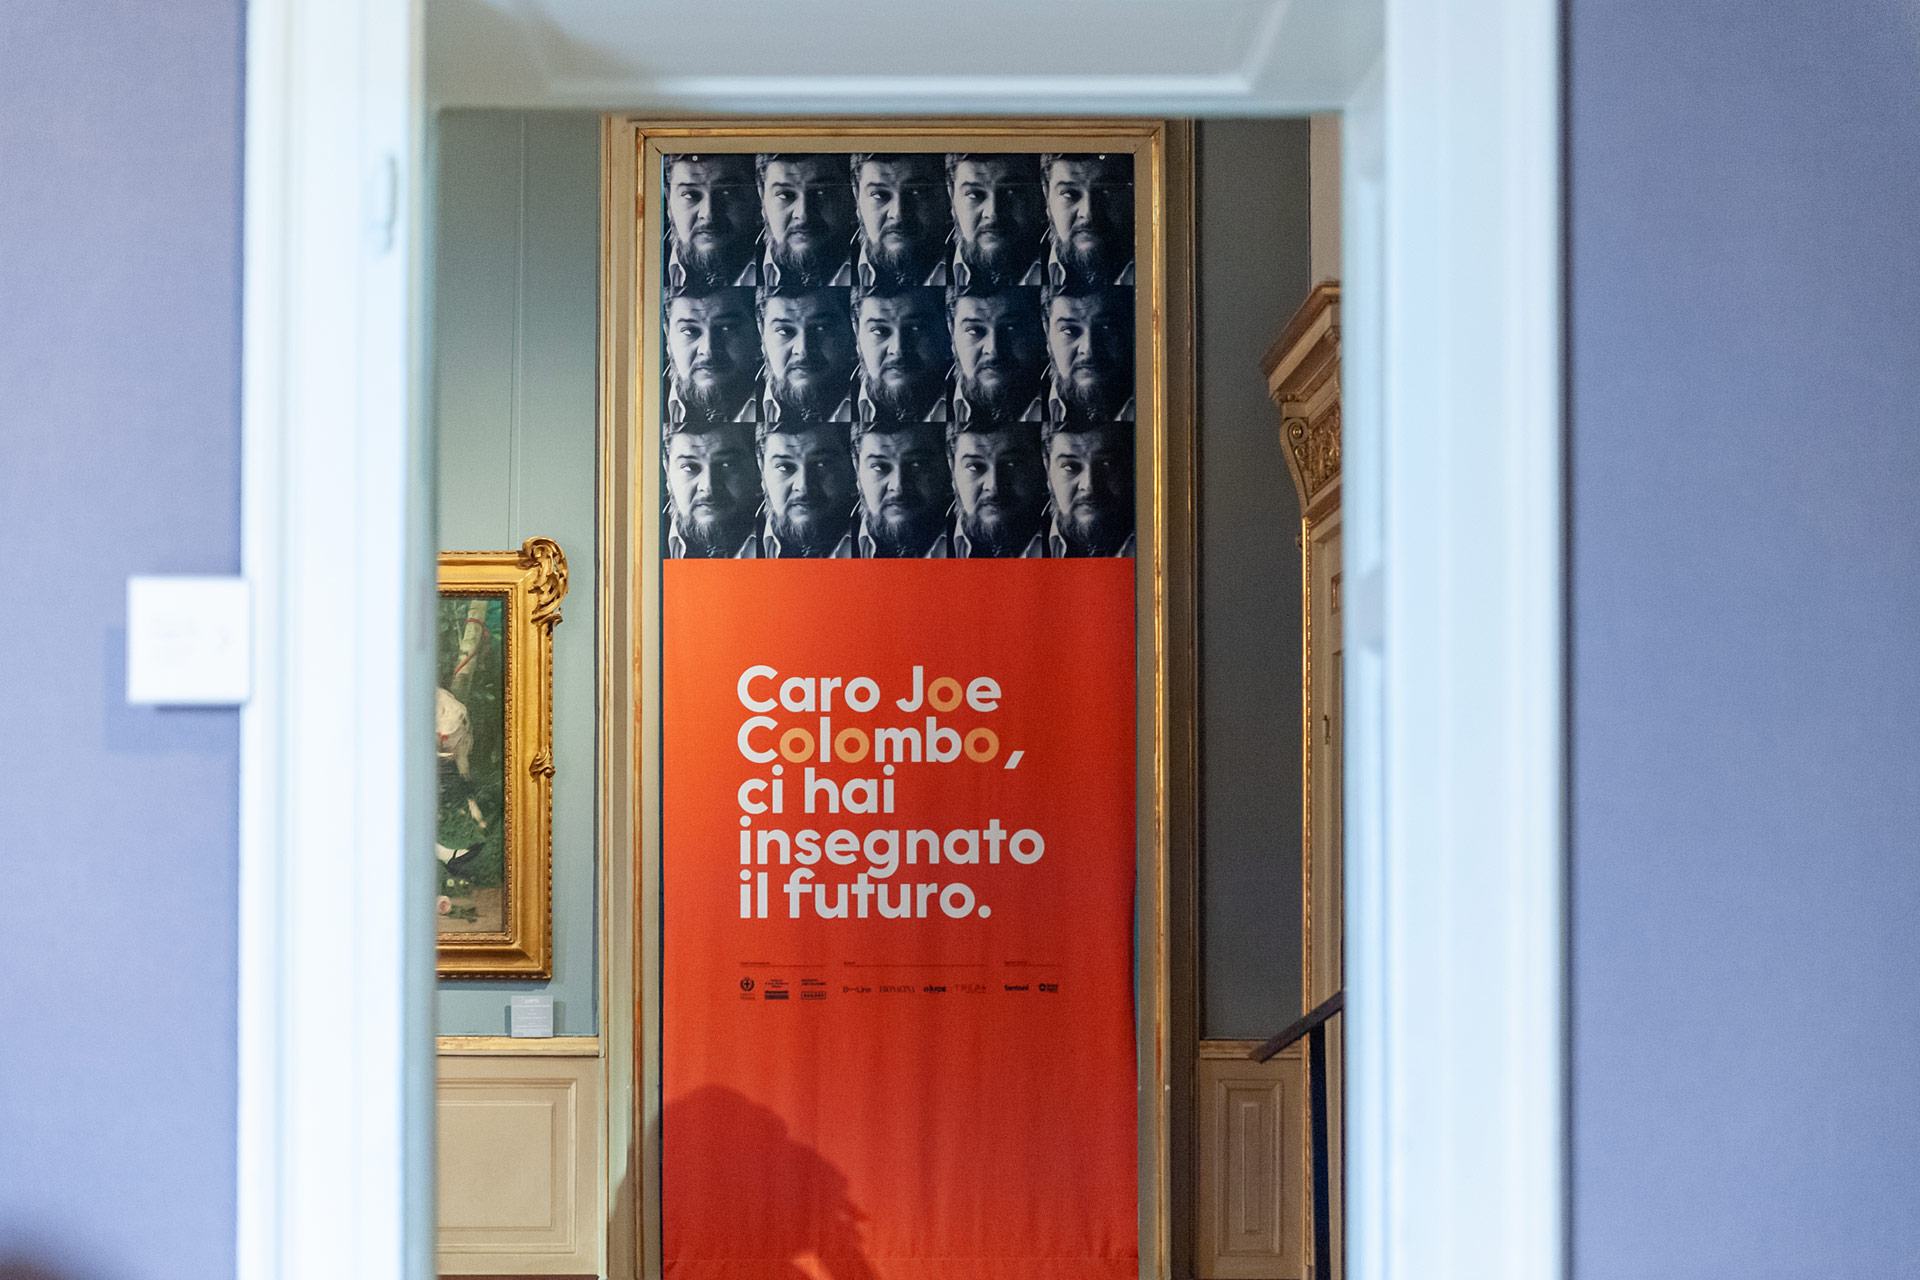 Oluce is one of the partners of the exhibition event dedicated to Joe Colombo at the GAM in Milan